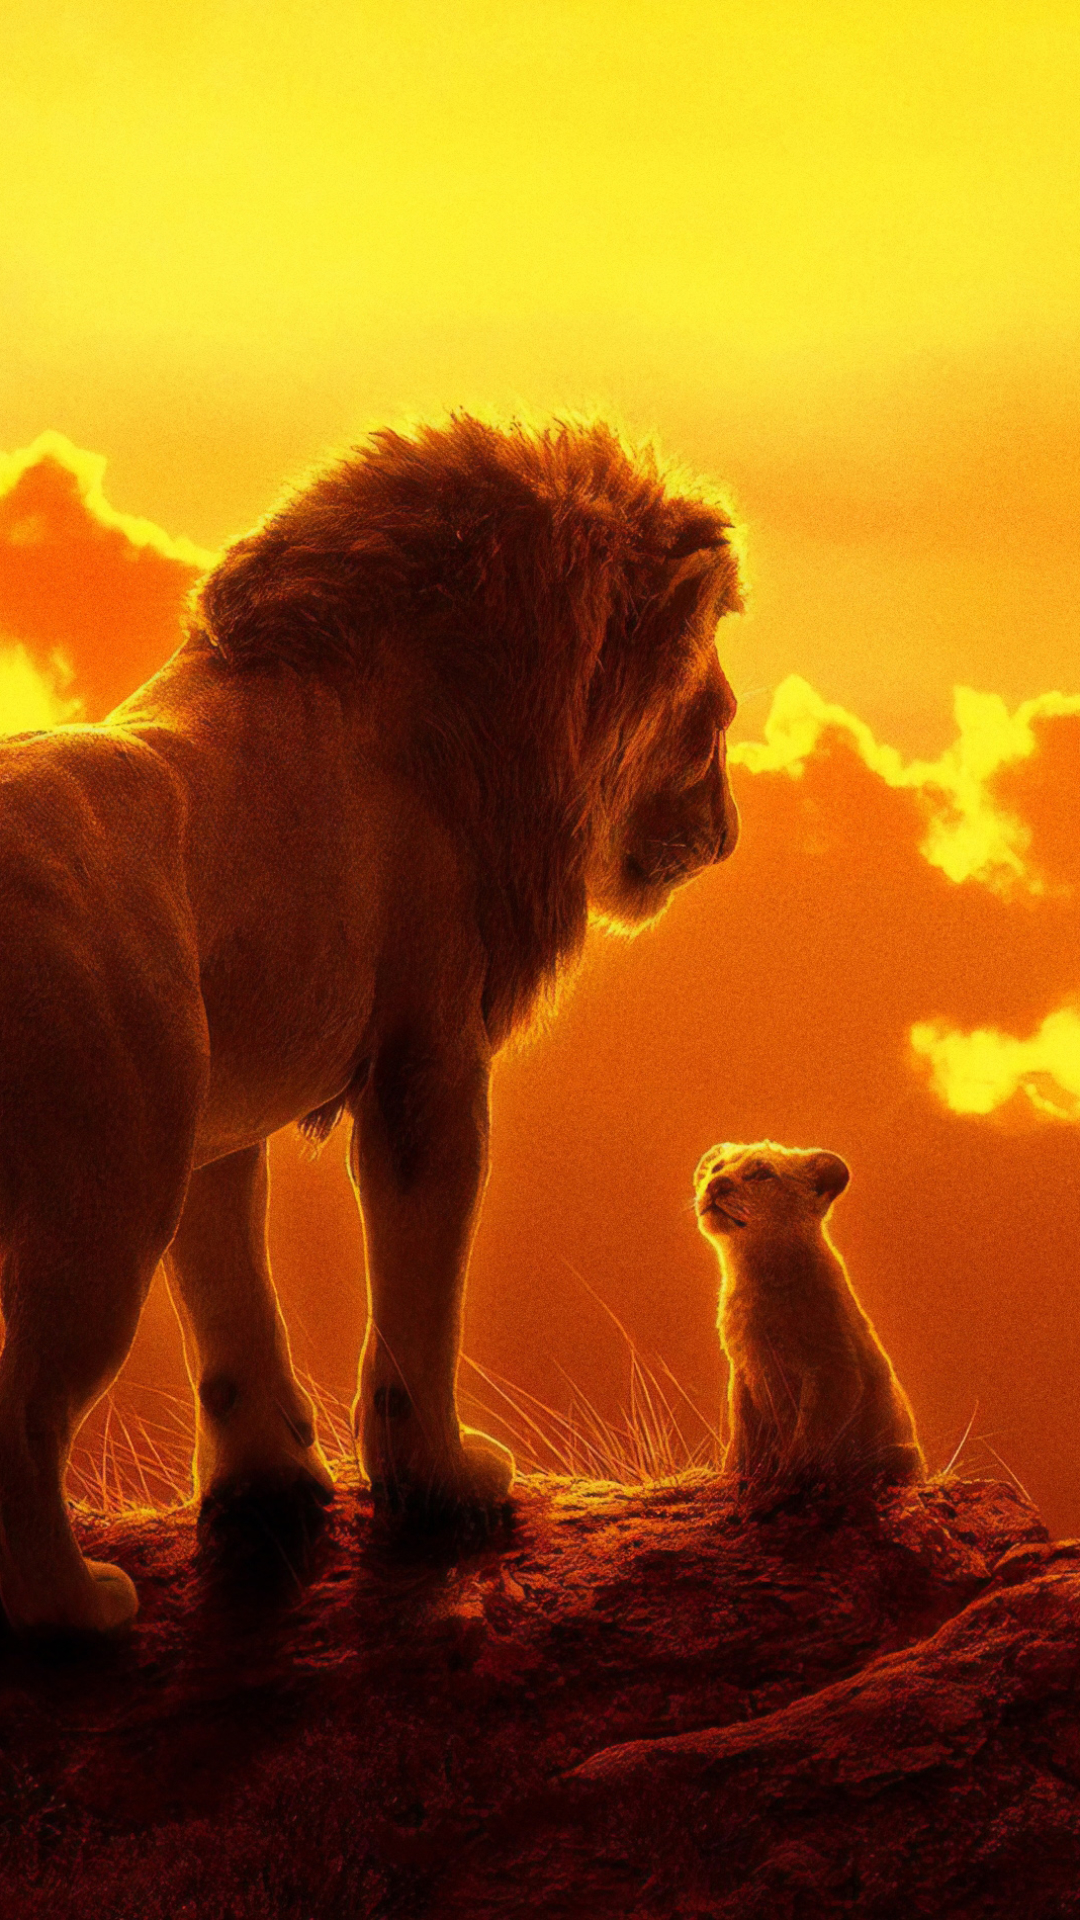 movie, the lion king (2019) wallpapers for tablet